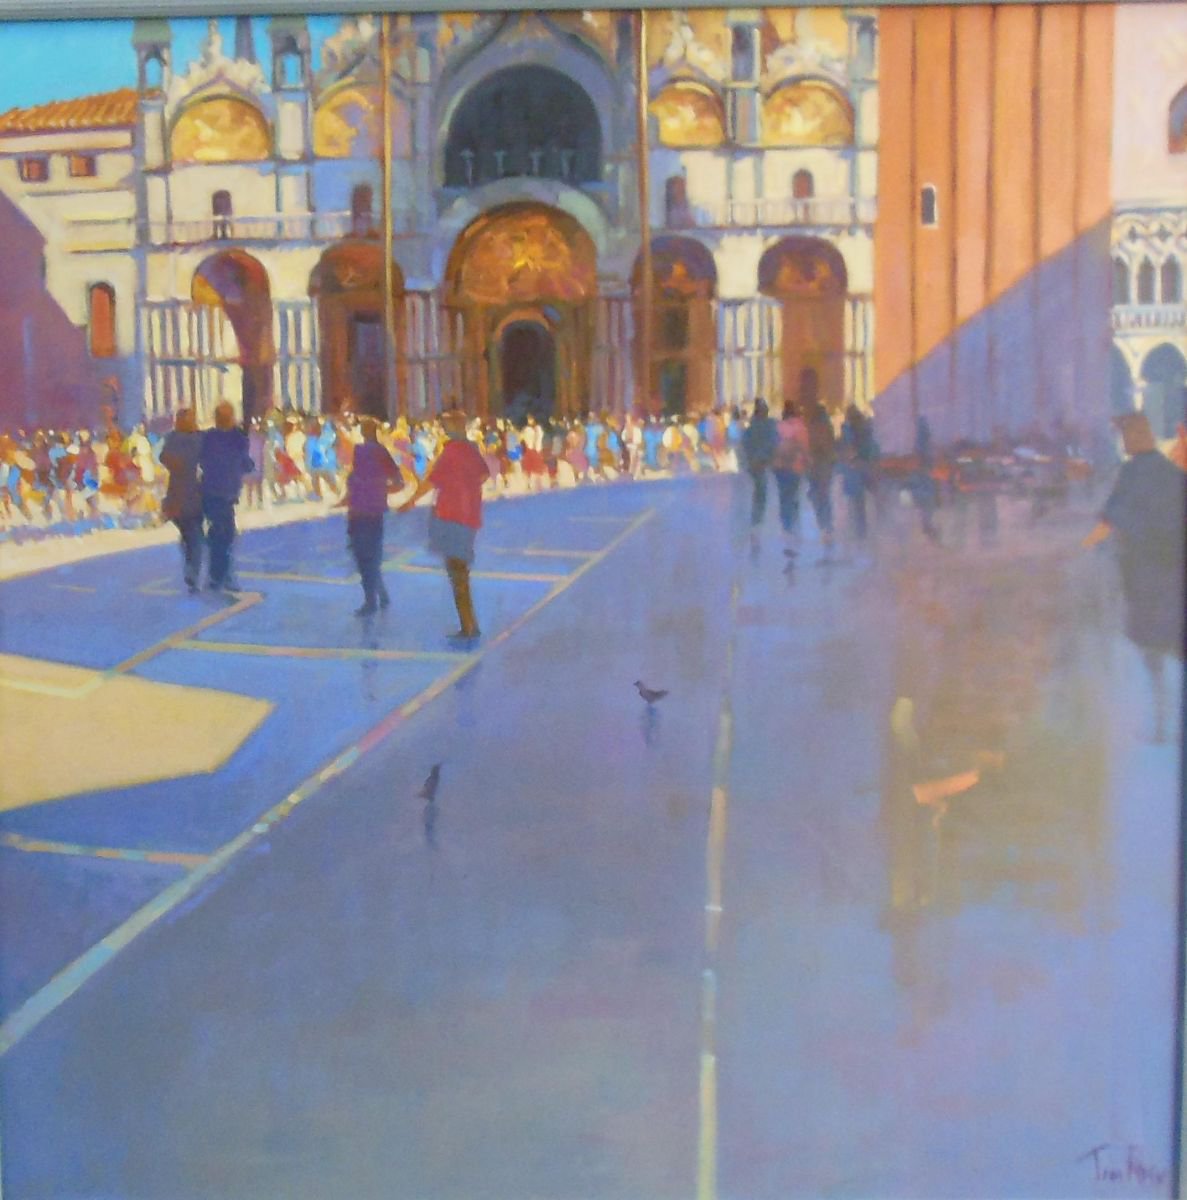 Afternoon in St Marks by Tim Rose